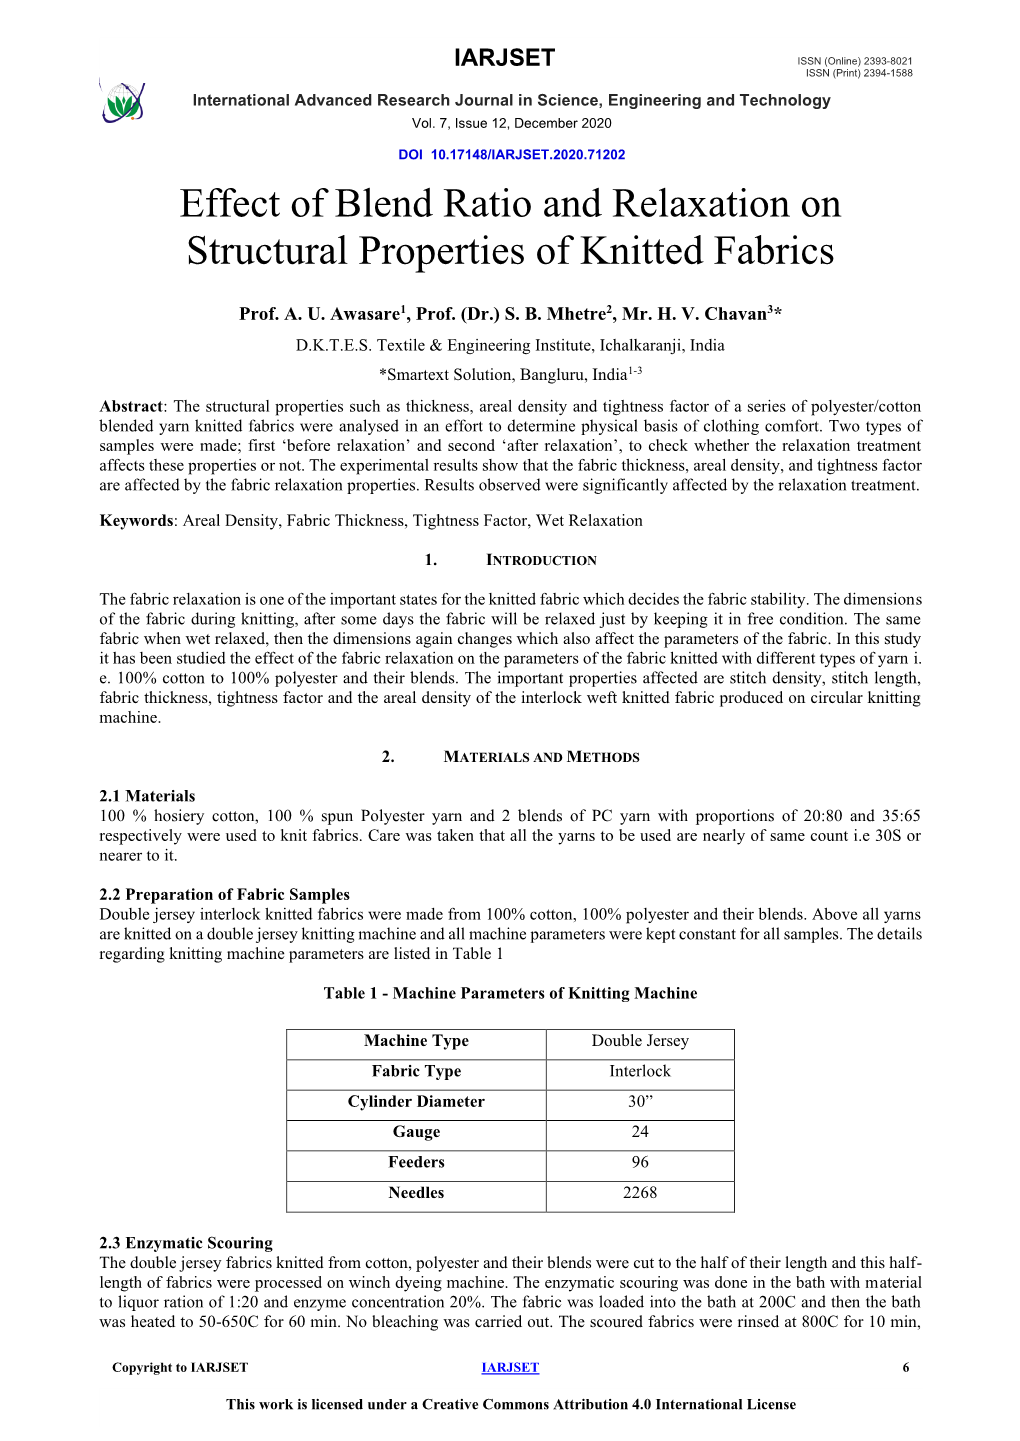 Effect of Blend Ratio and Relaxation on Structural Properties of Knitted Fabrics